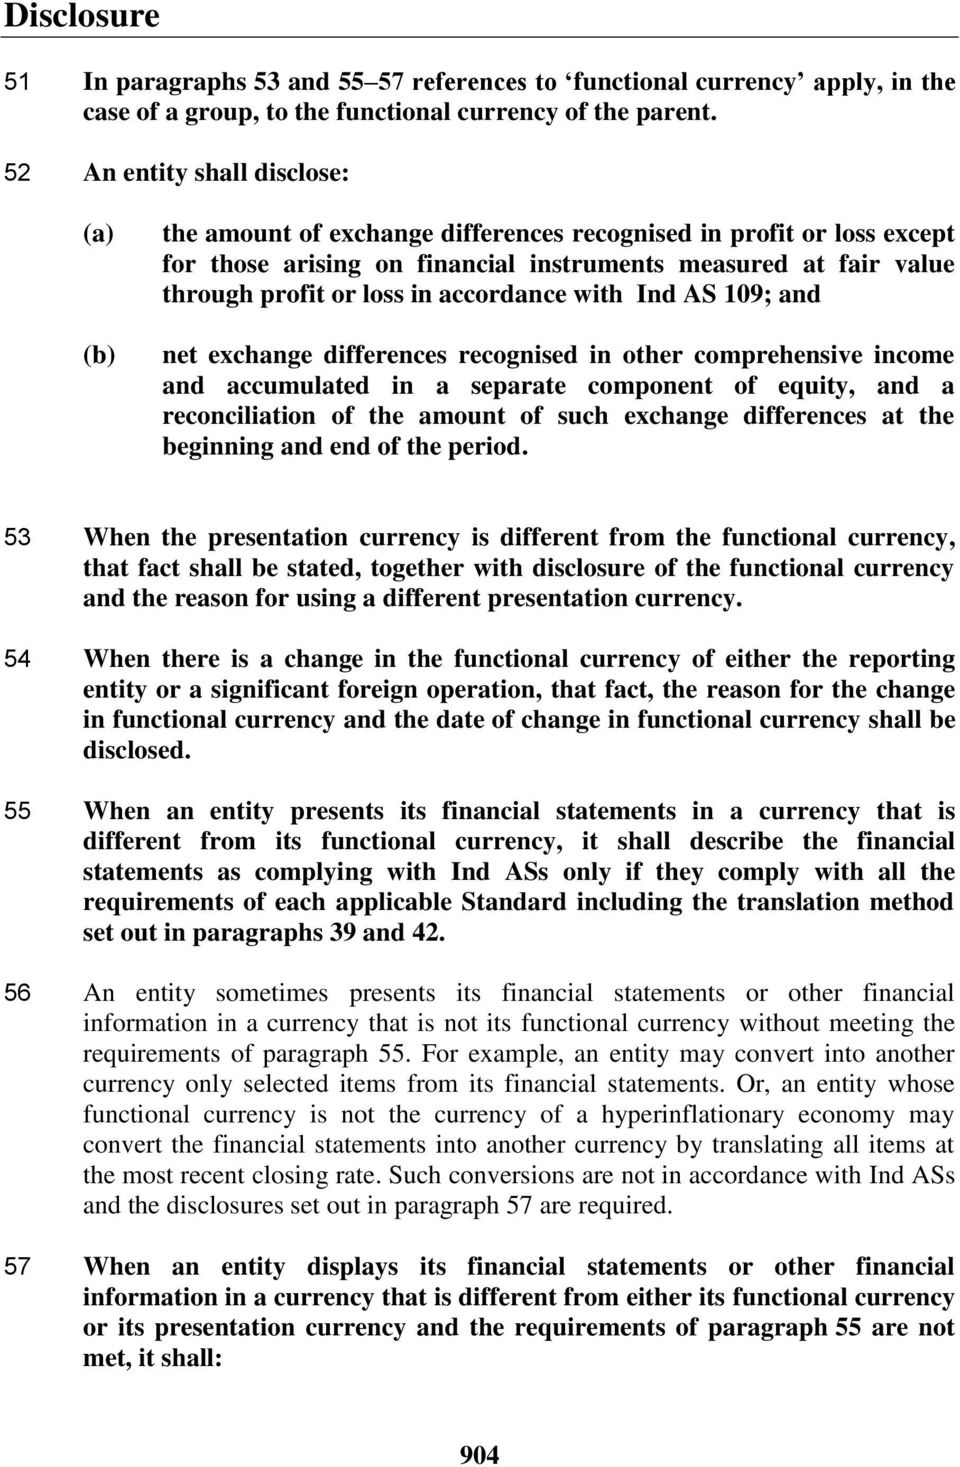 accordance with Ind AS 109; and net exchange differences recognised in other comprehensive income and accumulated in a separate component of equity, and a reconciliation of the amount of such